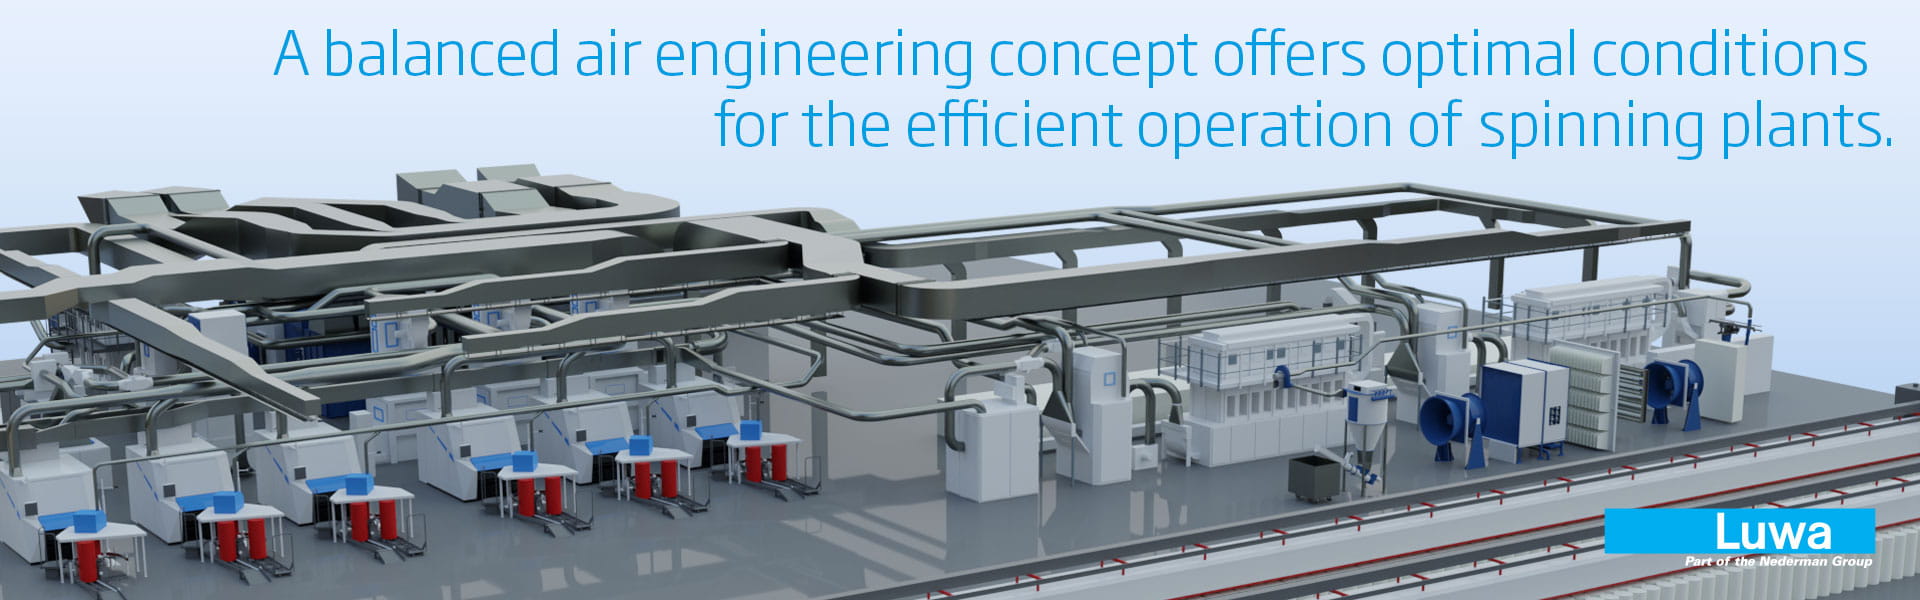 A balanced air engineering concept offers optimal conditions for the efficient operation of spinning plants